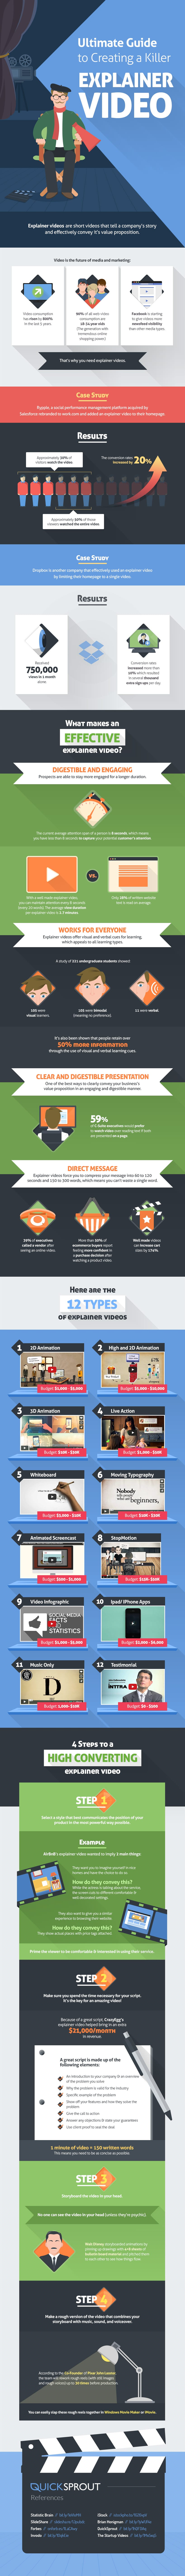 Ultimate-Guide-to-Creating-a-Killer-Explainer-Video